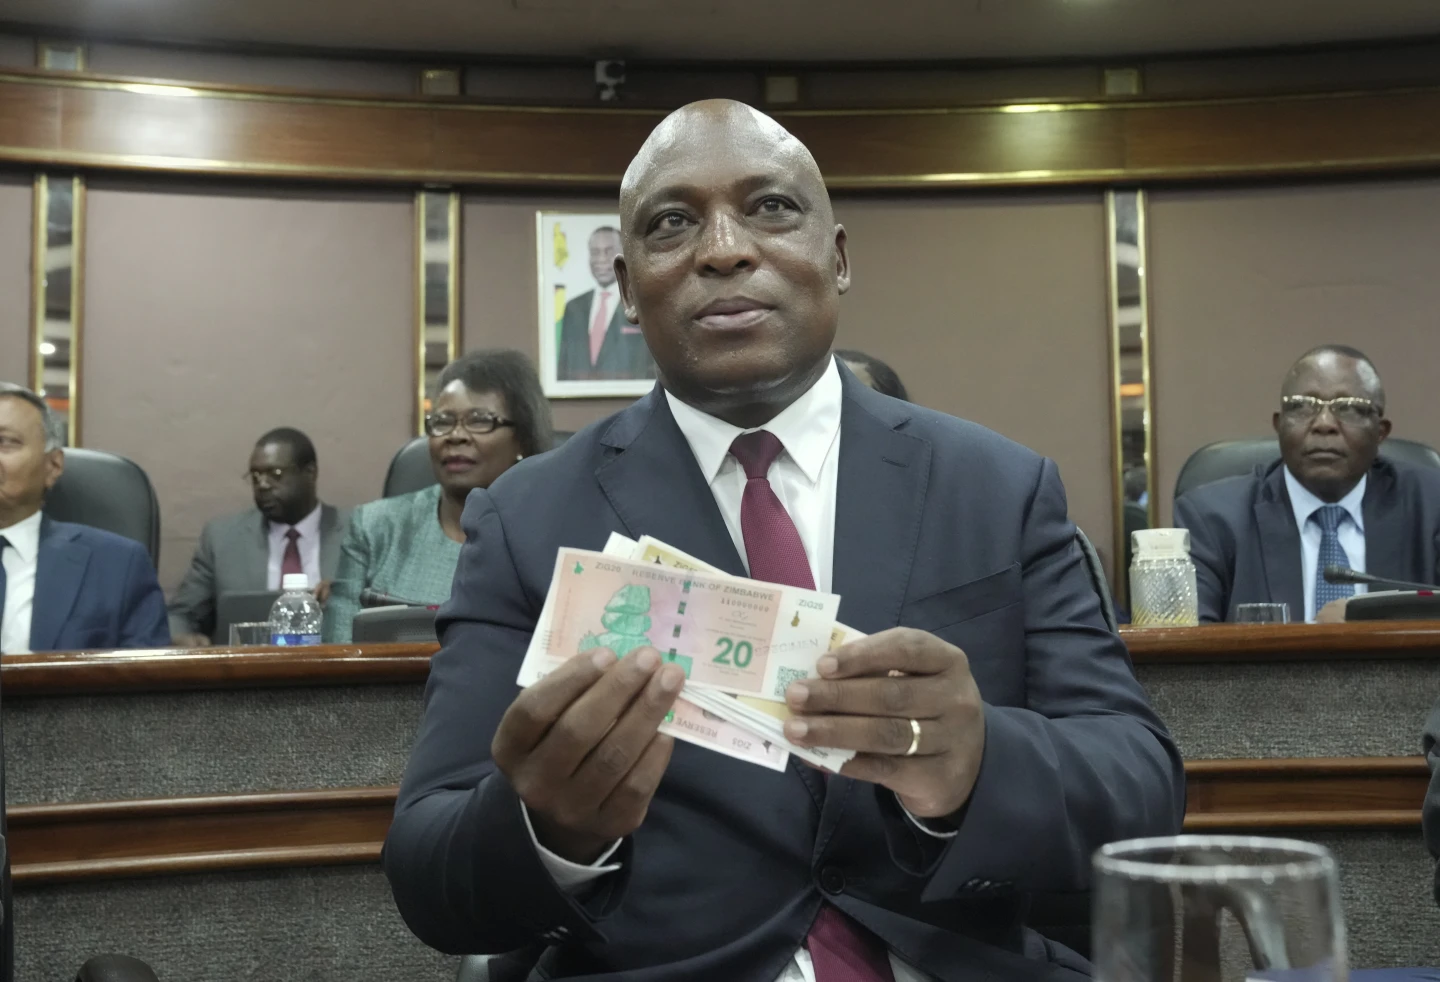 Economic turmoil: Zimbabwe introduces ZiG as its new currency to replace battered Zim dollar